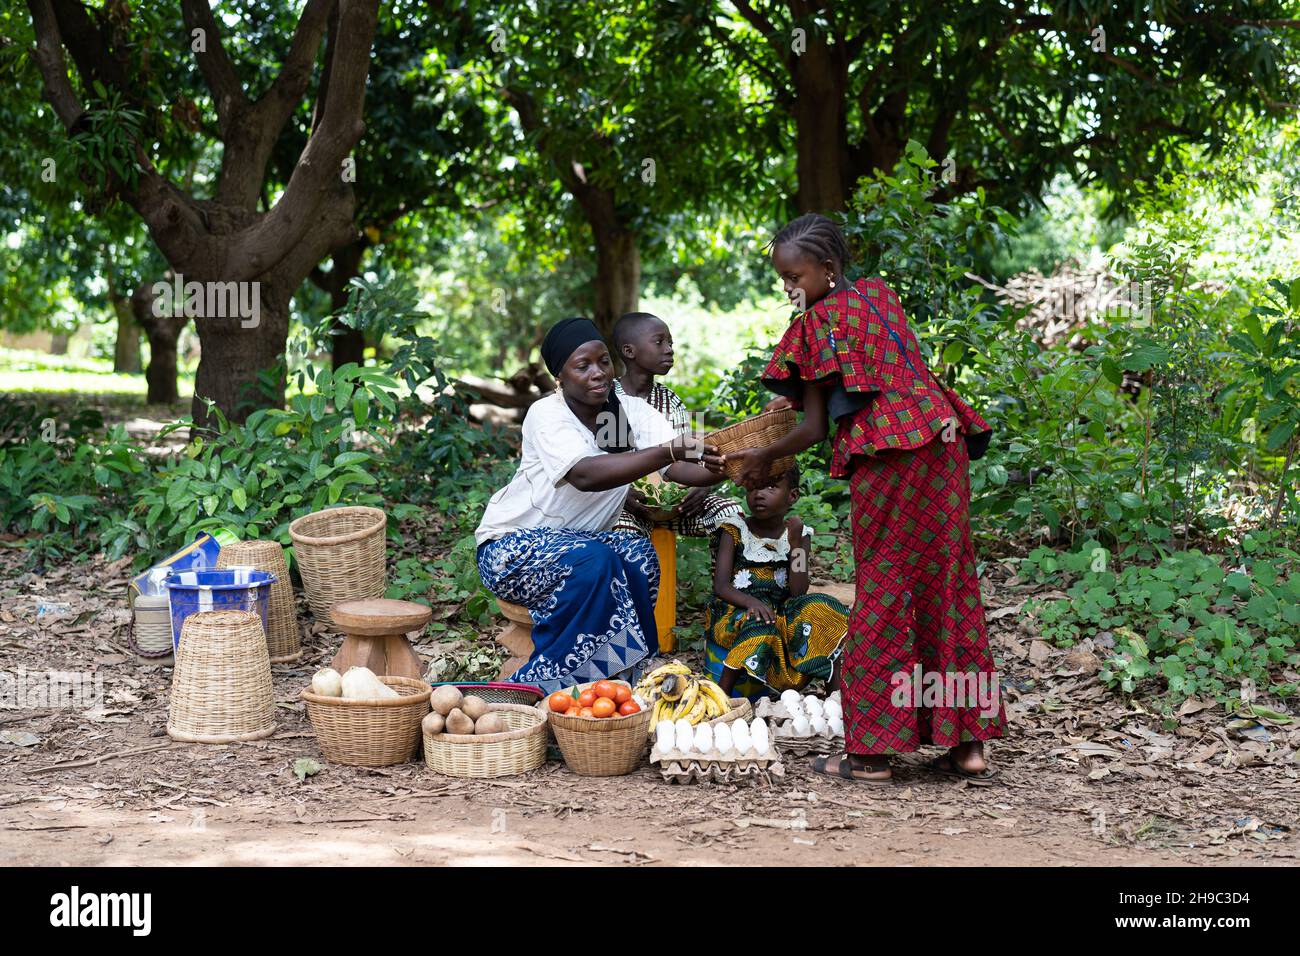 Typical West African street market scene with women selling vegetables Stock Photo